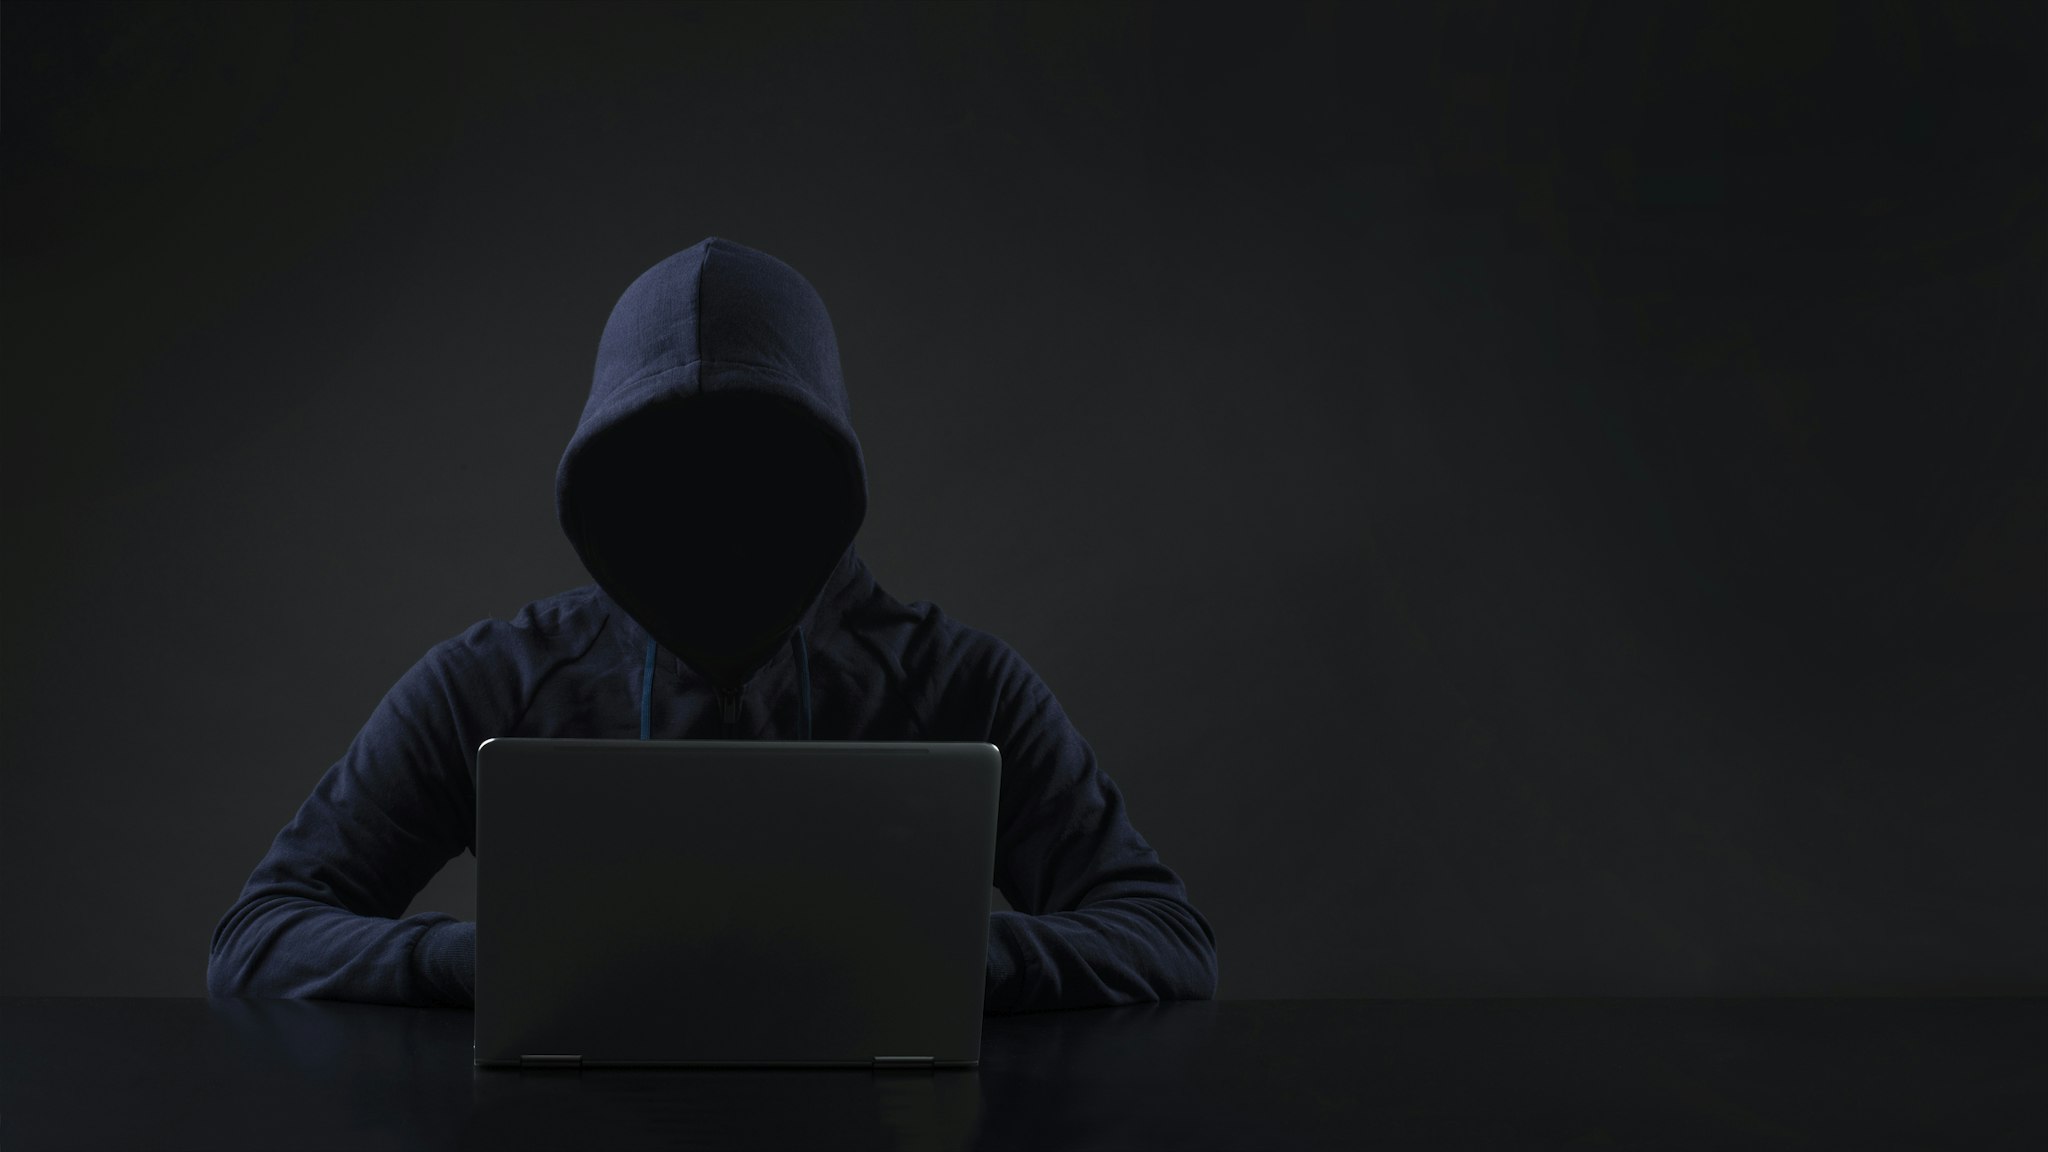 Hacker in front of computer - stock photo